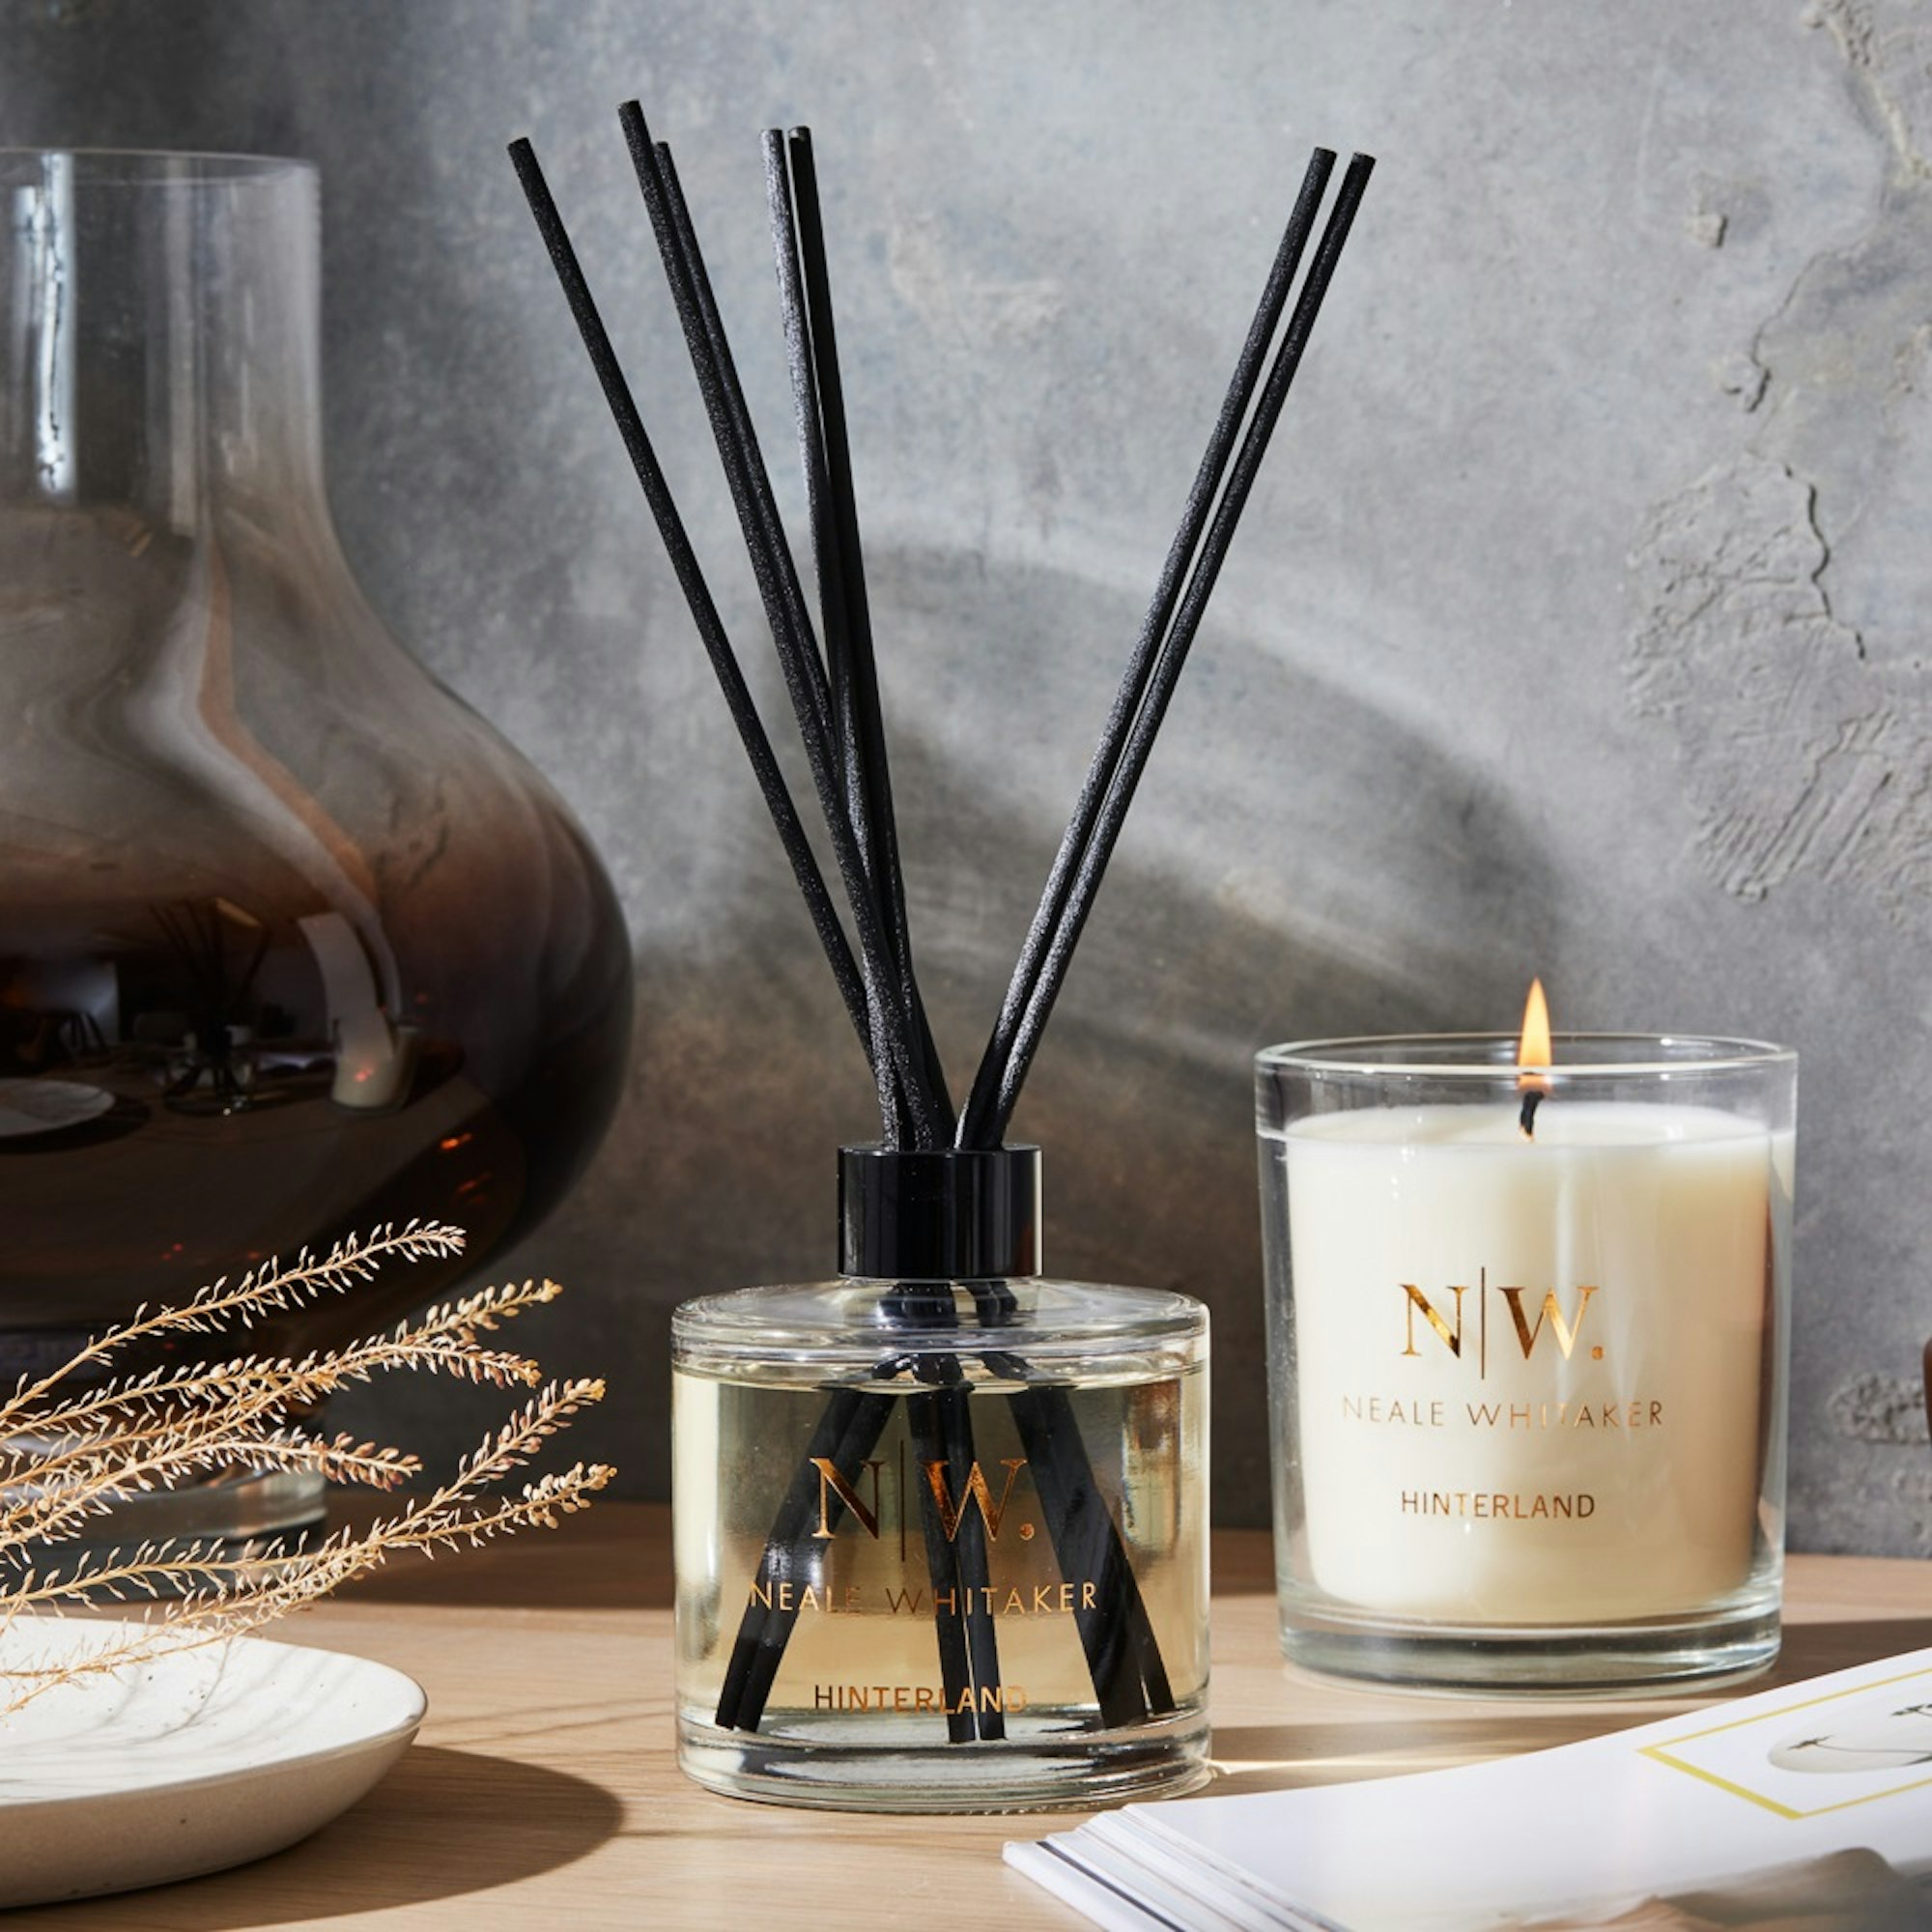 Neale Whitaker scented candle and diffuser. Dark and moody setting with lit candle and textured wall.